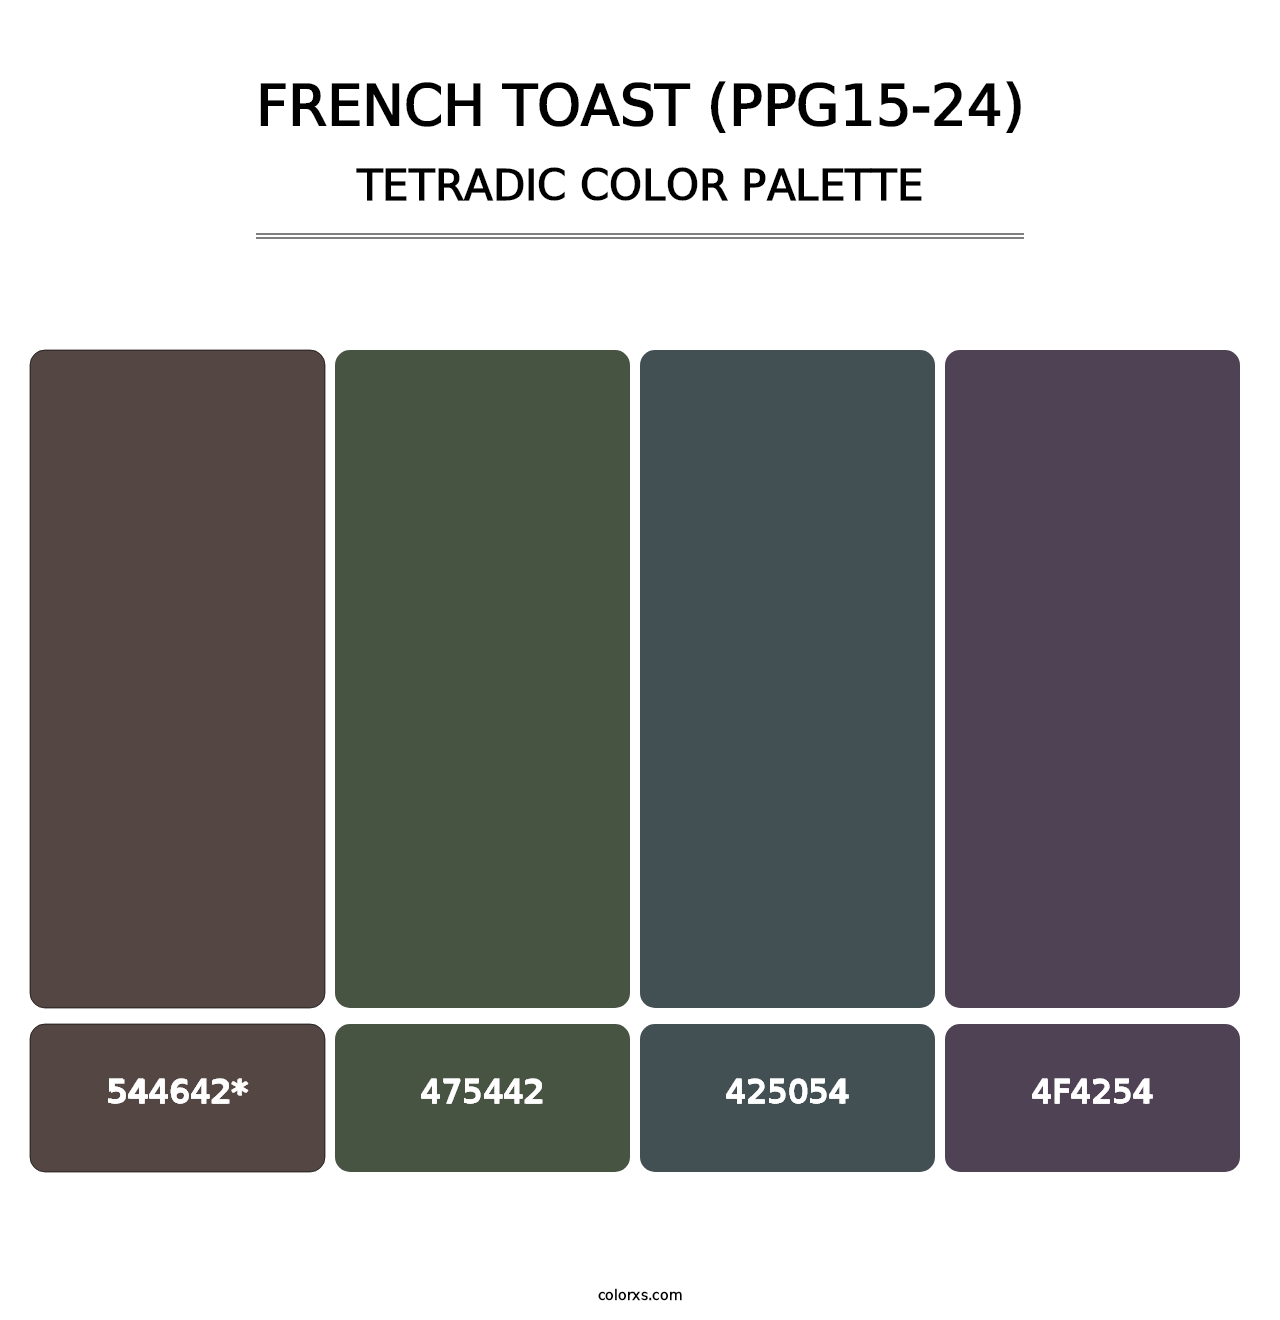 French Toast (PPG15-24) - Tetradic Color Palette